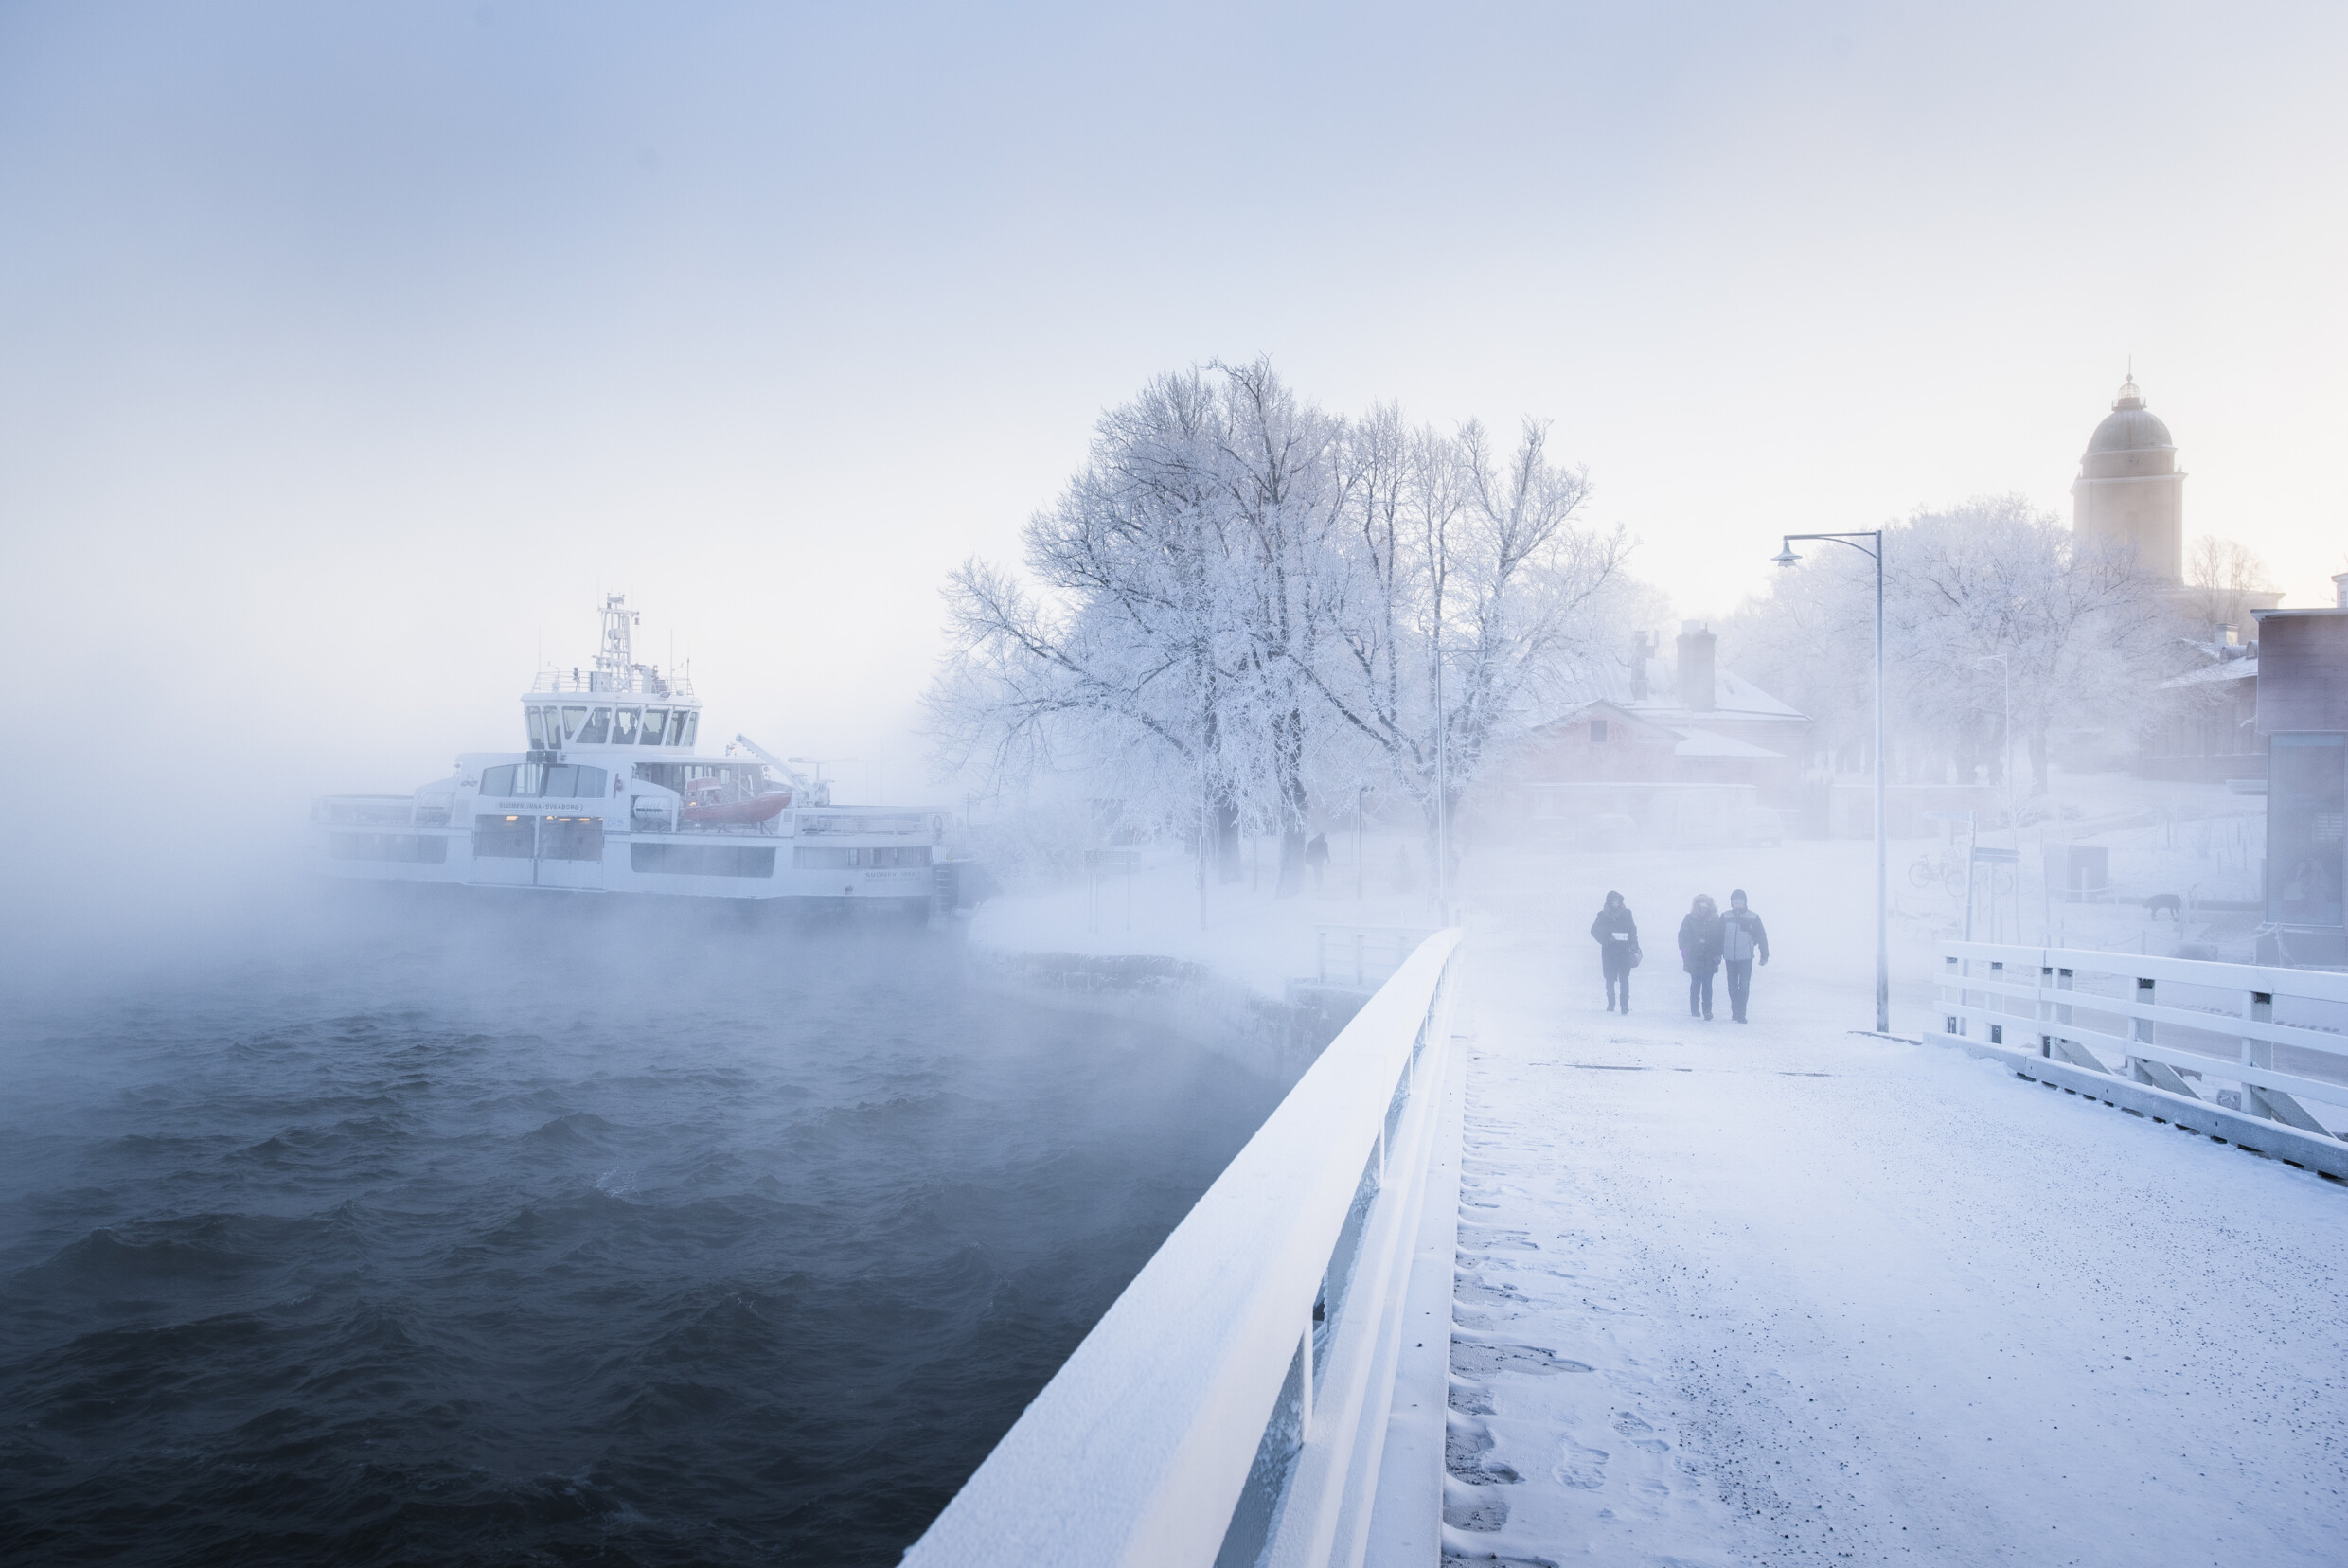 Suomenlinna is even more magical during winter